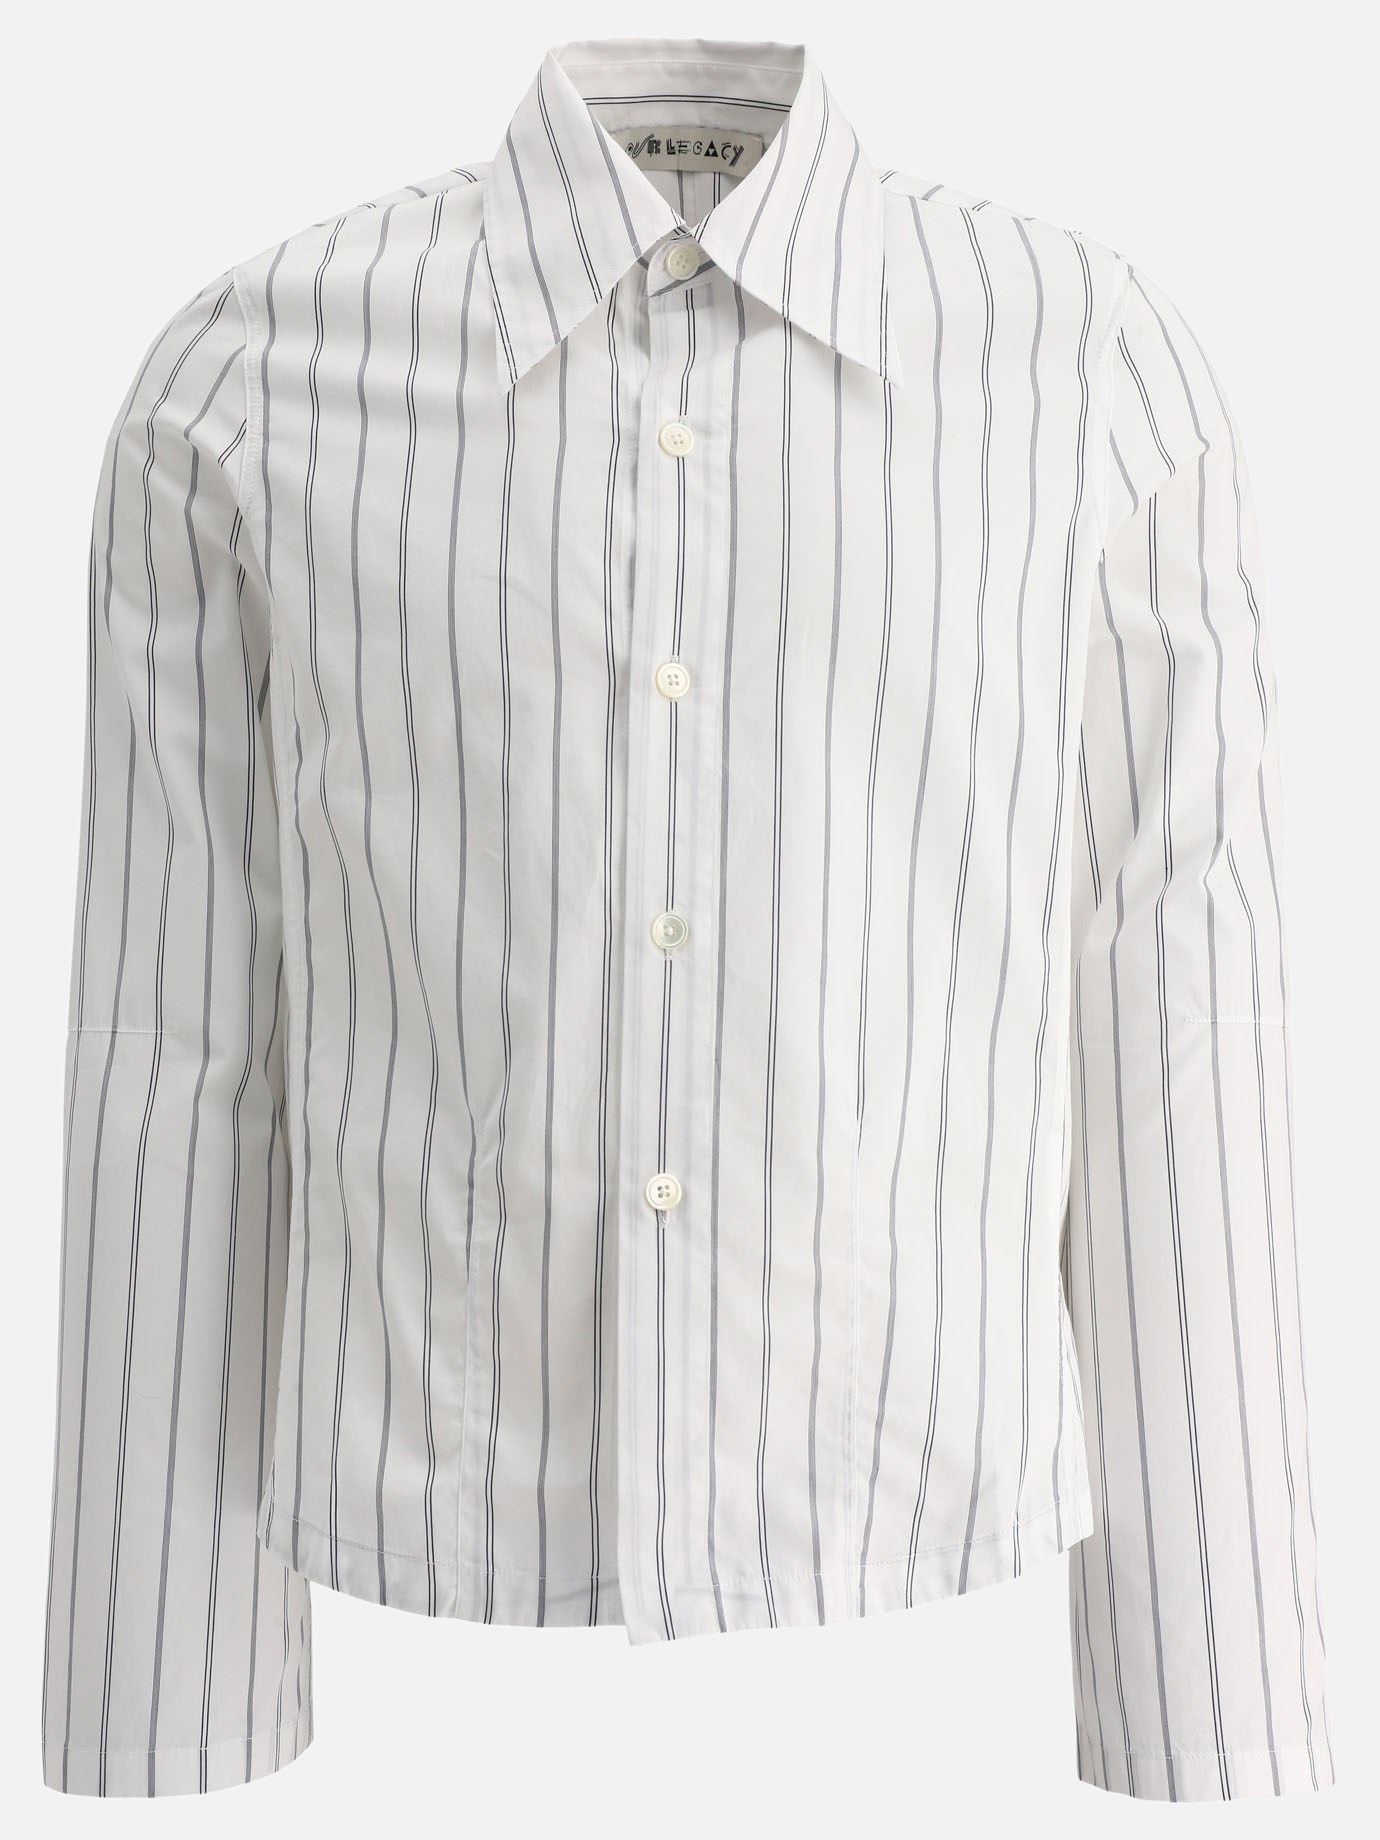  Consultancy Stripe  shirtby Our Legacy - 2